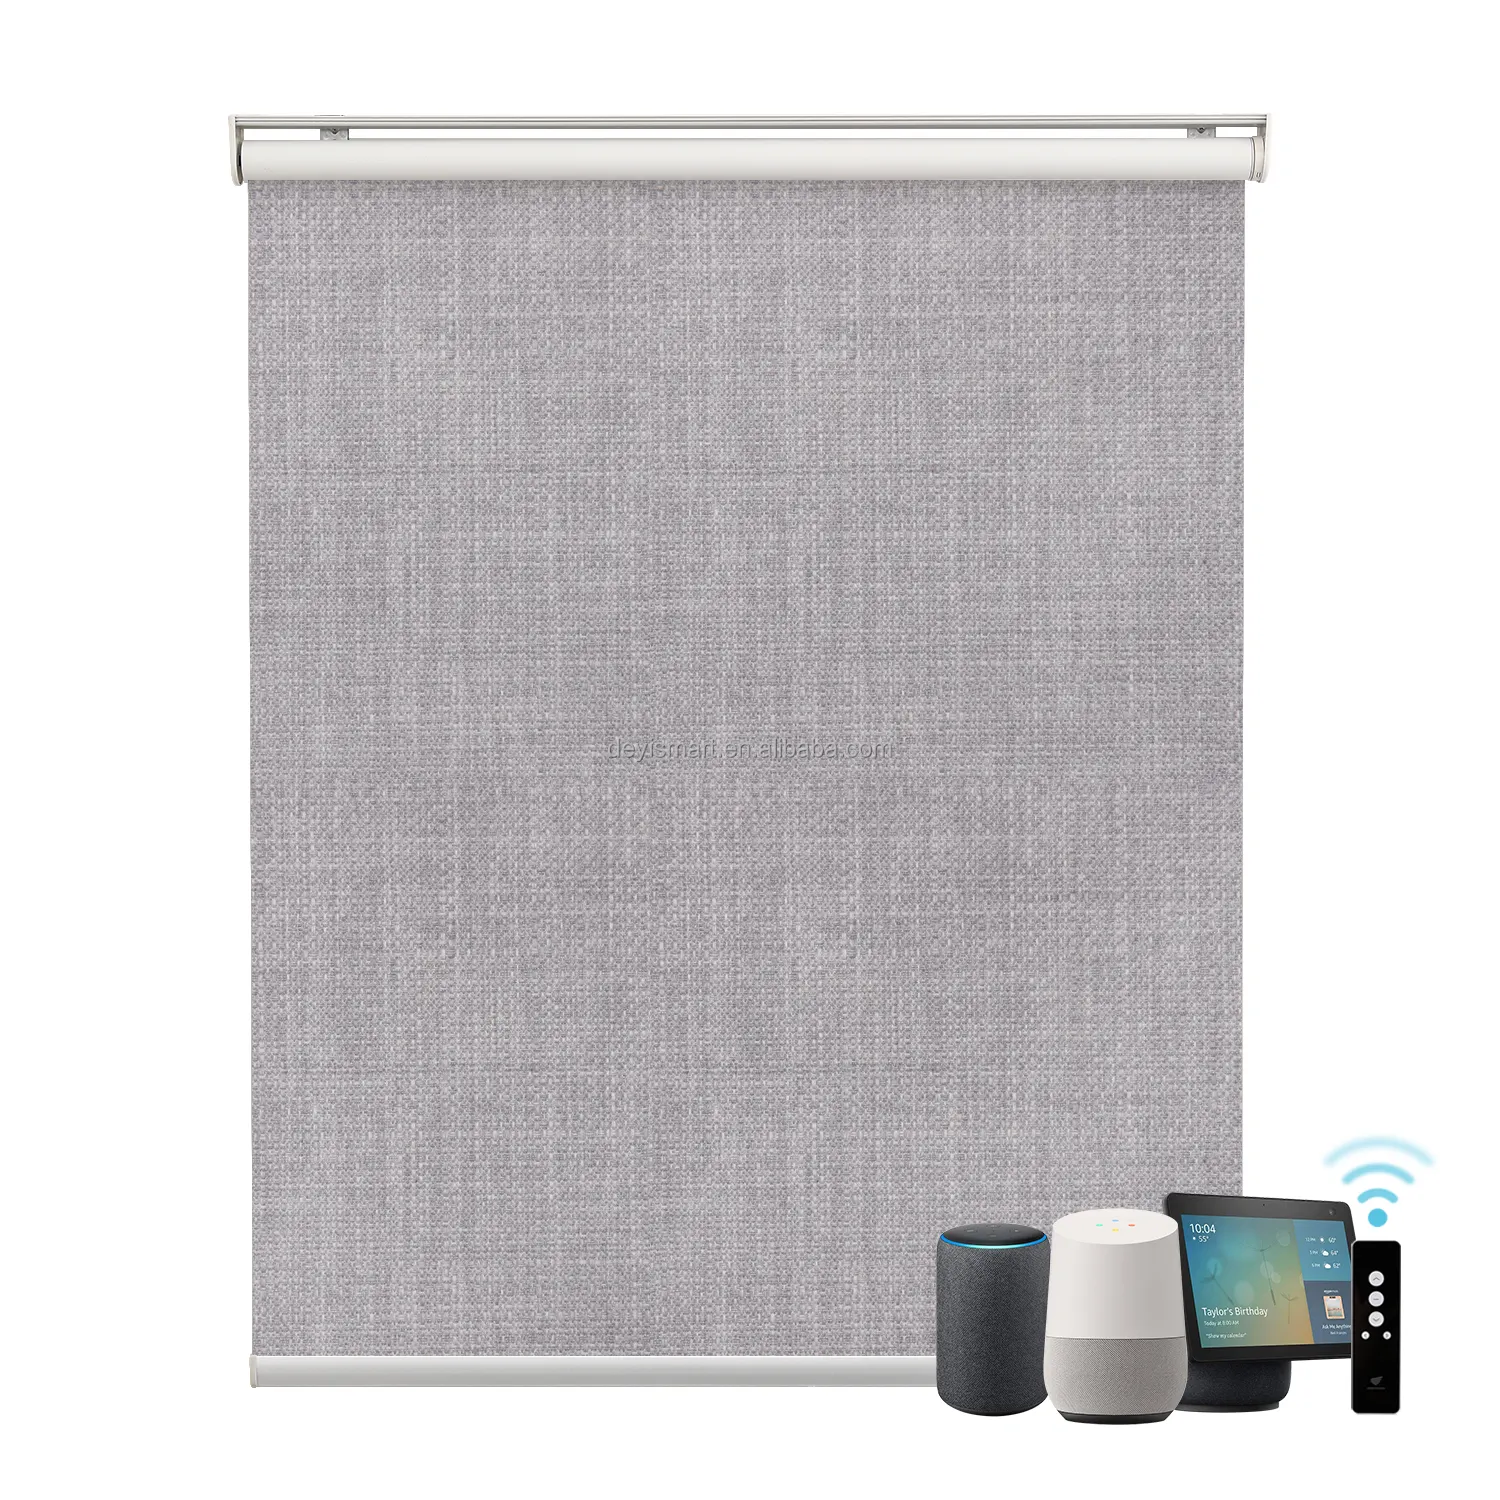 Window Cover Home Windows Honeycomb Electric Remote Controlled Rolling Patio Shades Smart Blinds